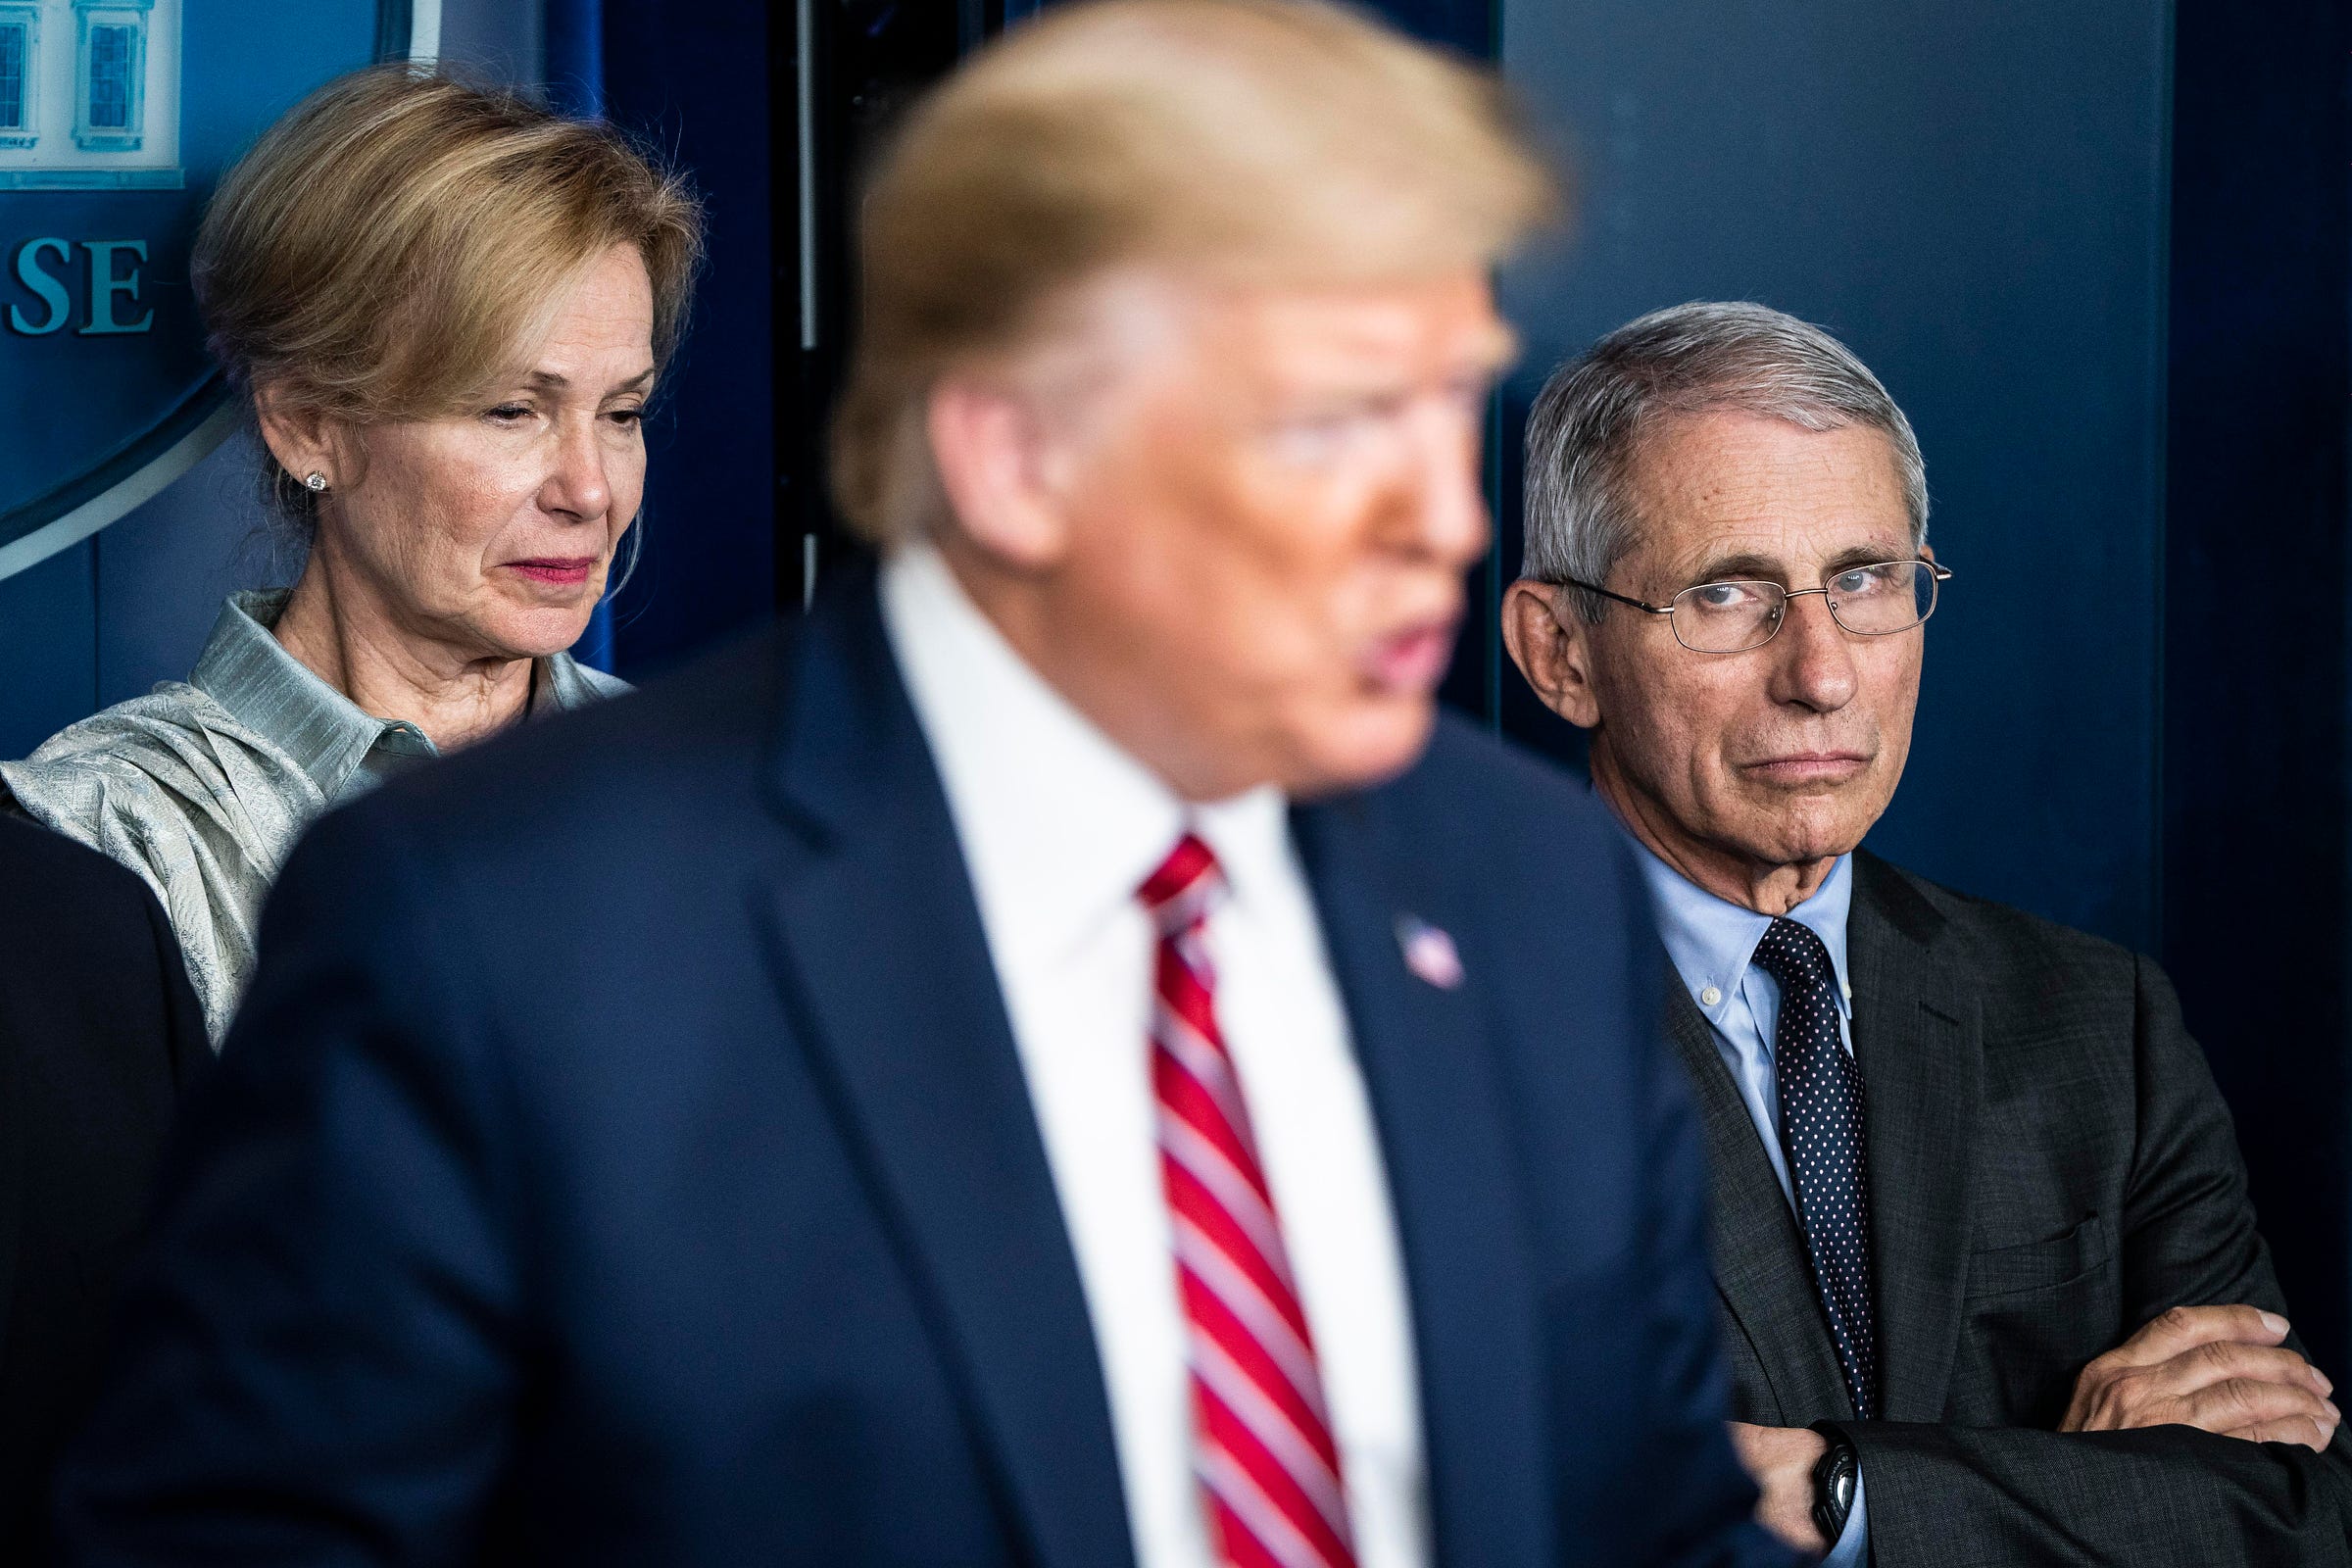 From left in background, Dr. Deborah Birx and Dr. Anthony Fauci listen as President Donald Trump speaks at a coronavirus briefing in Washington, DC, on March 20.